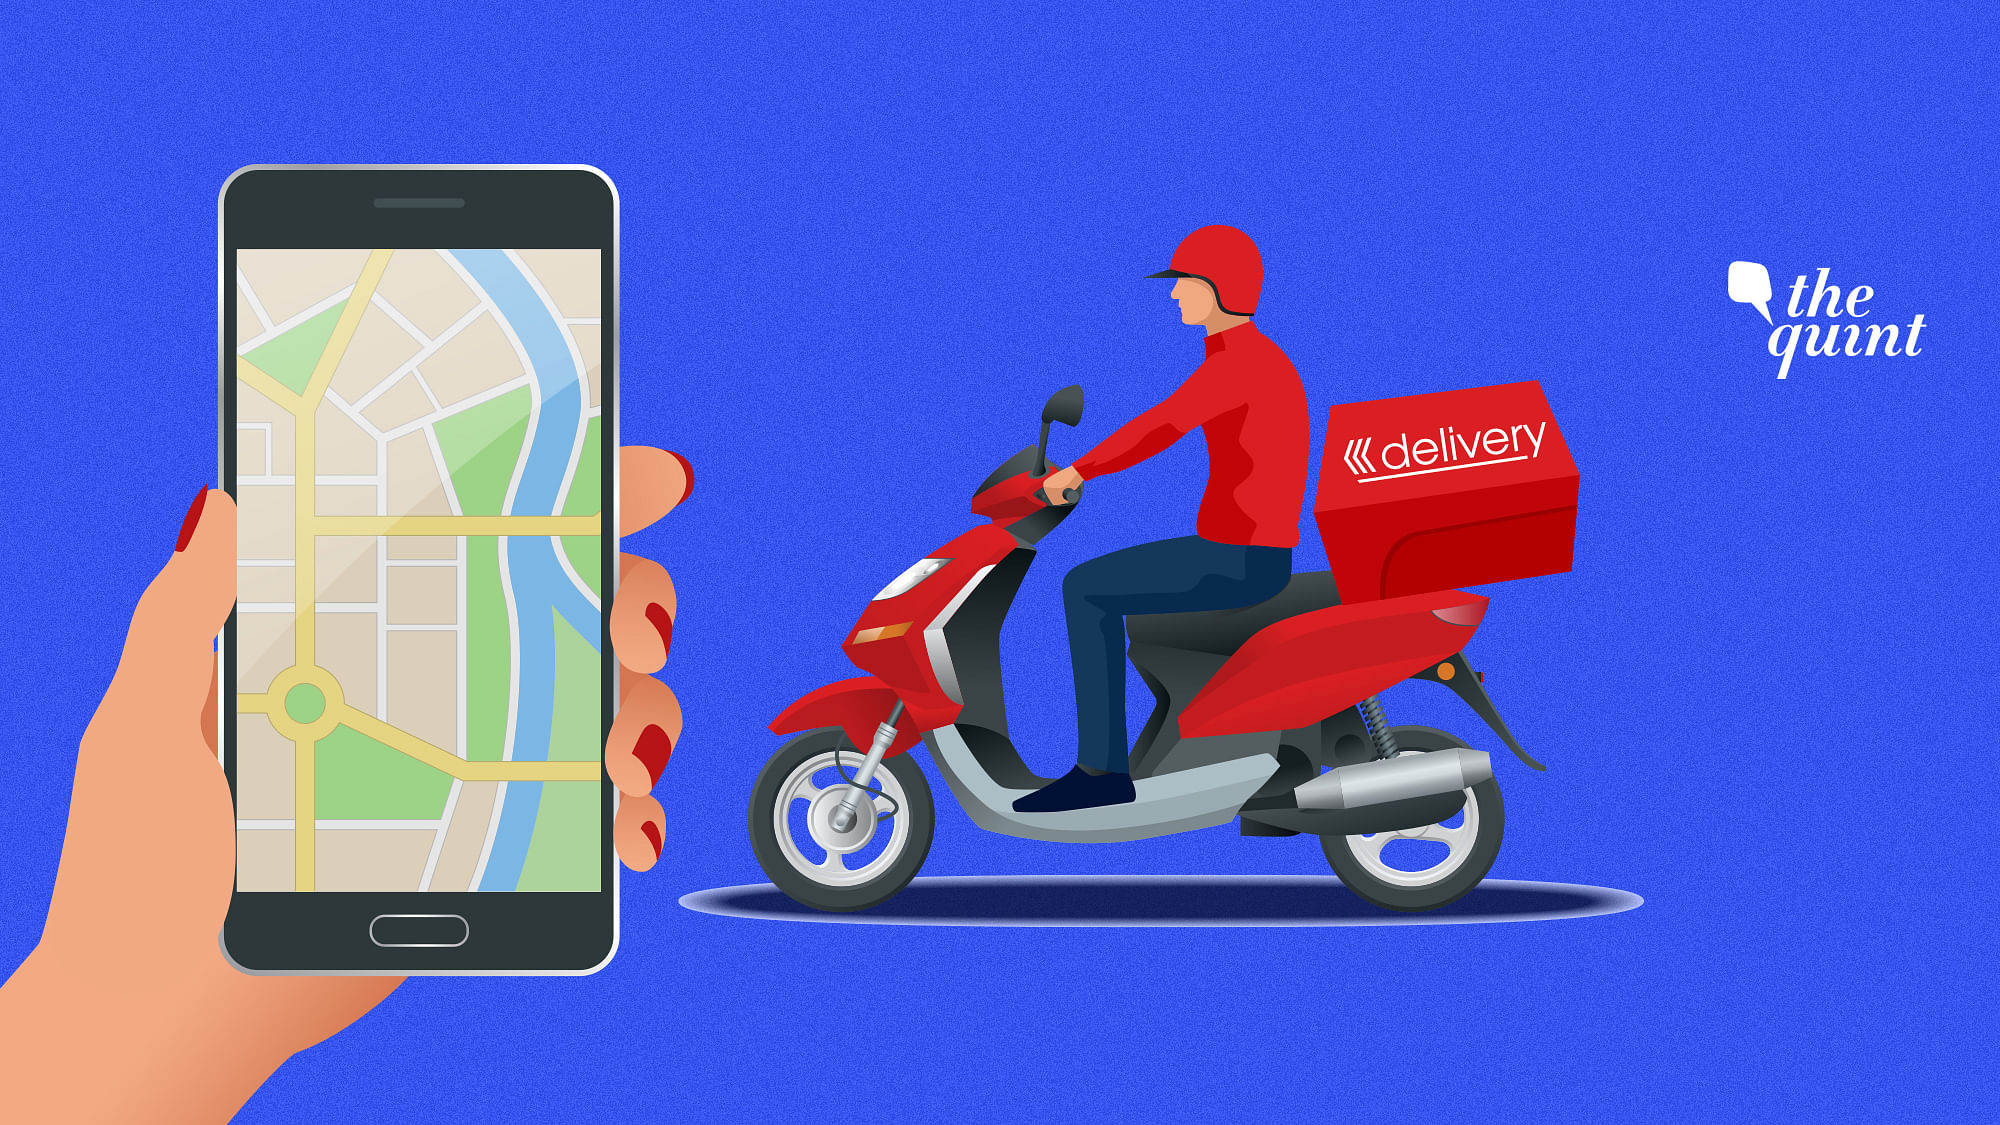 Food delivery apps are facing delivery issues (Image used for representational purposes).